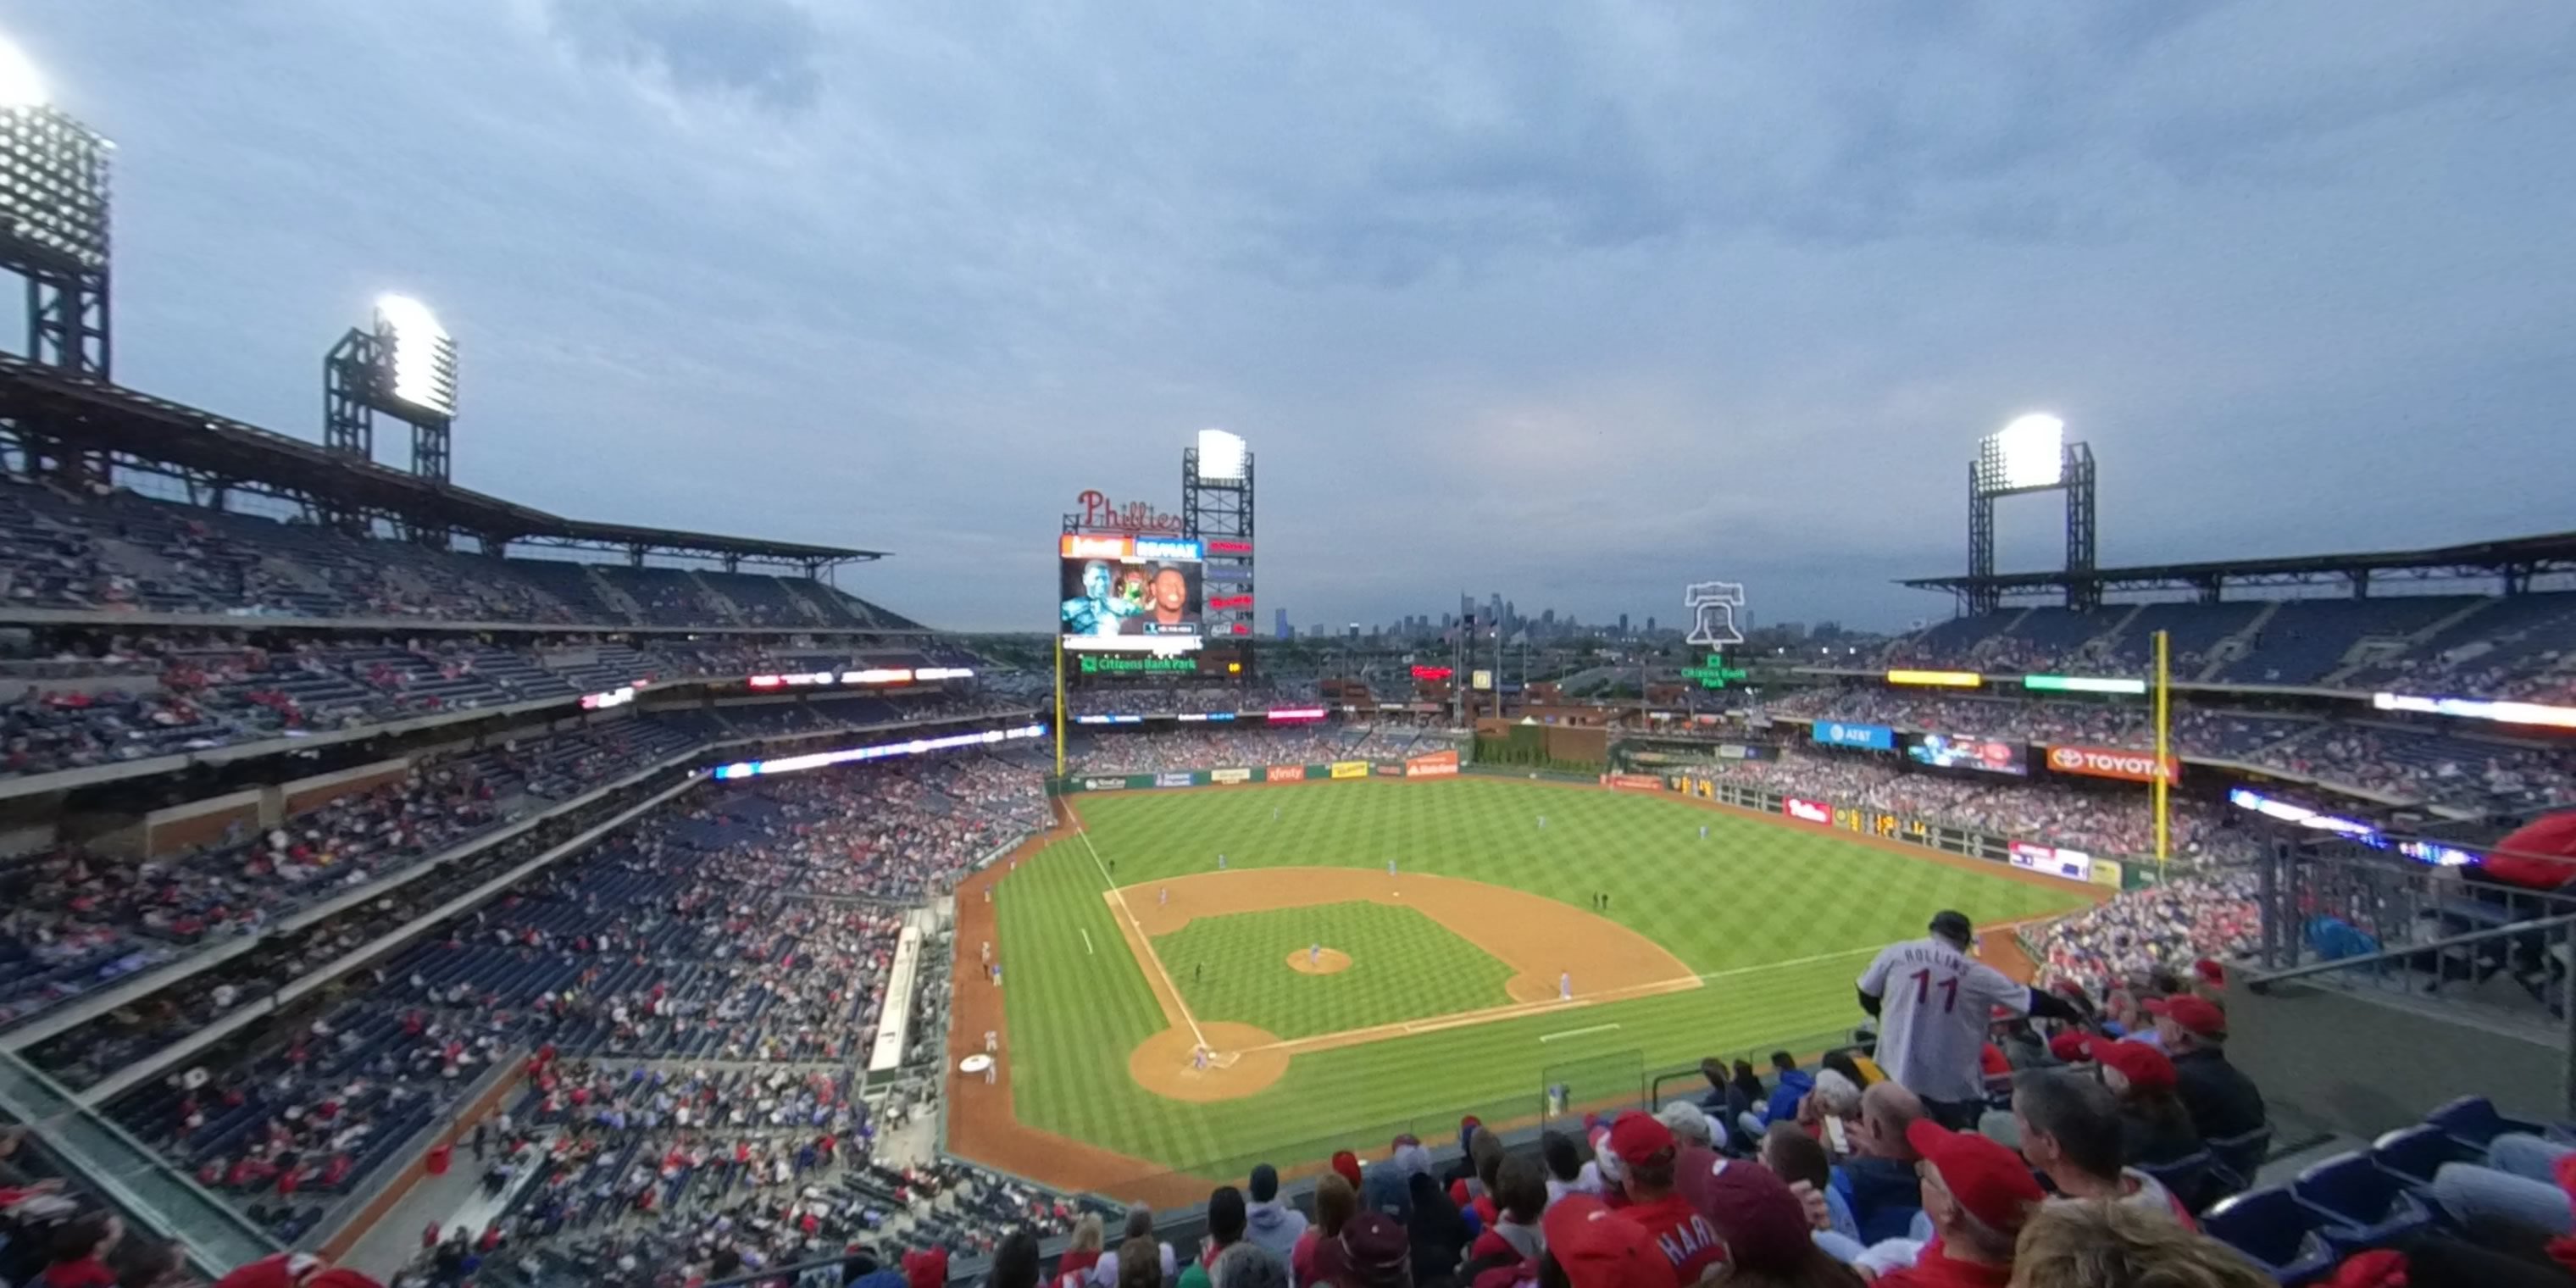 section 319 panoramic seat view  for baseball - citizens bank park